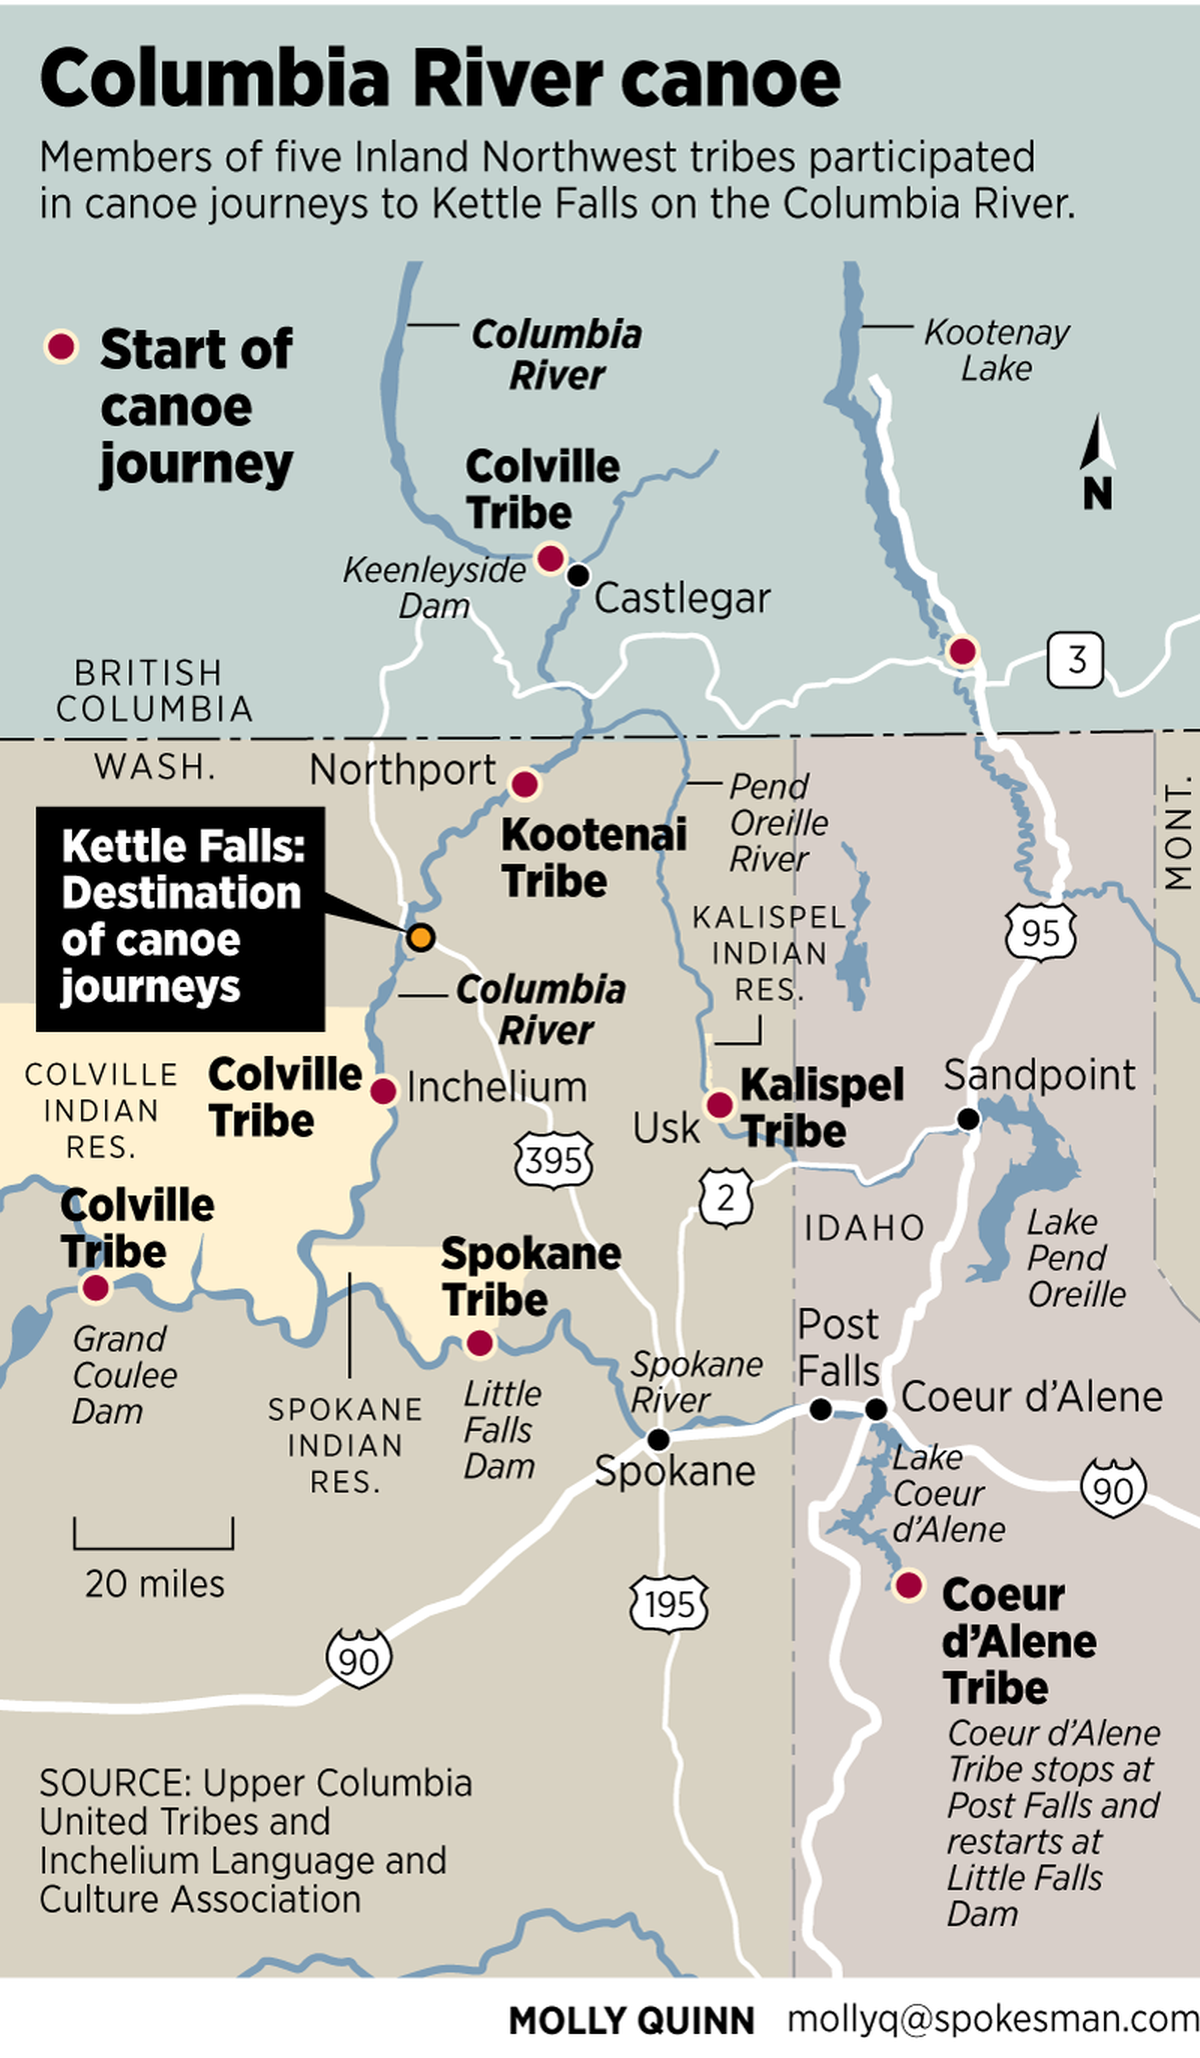 Tribes end canoe journey at Kettle Falls, celebrate hope of salmon’s